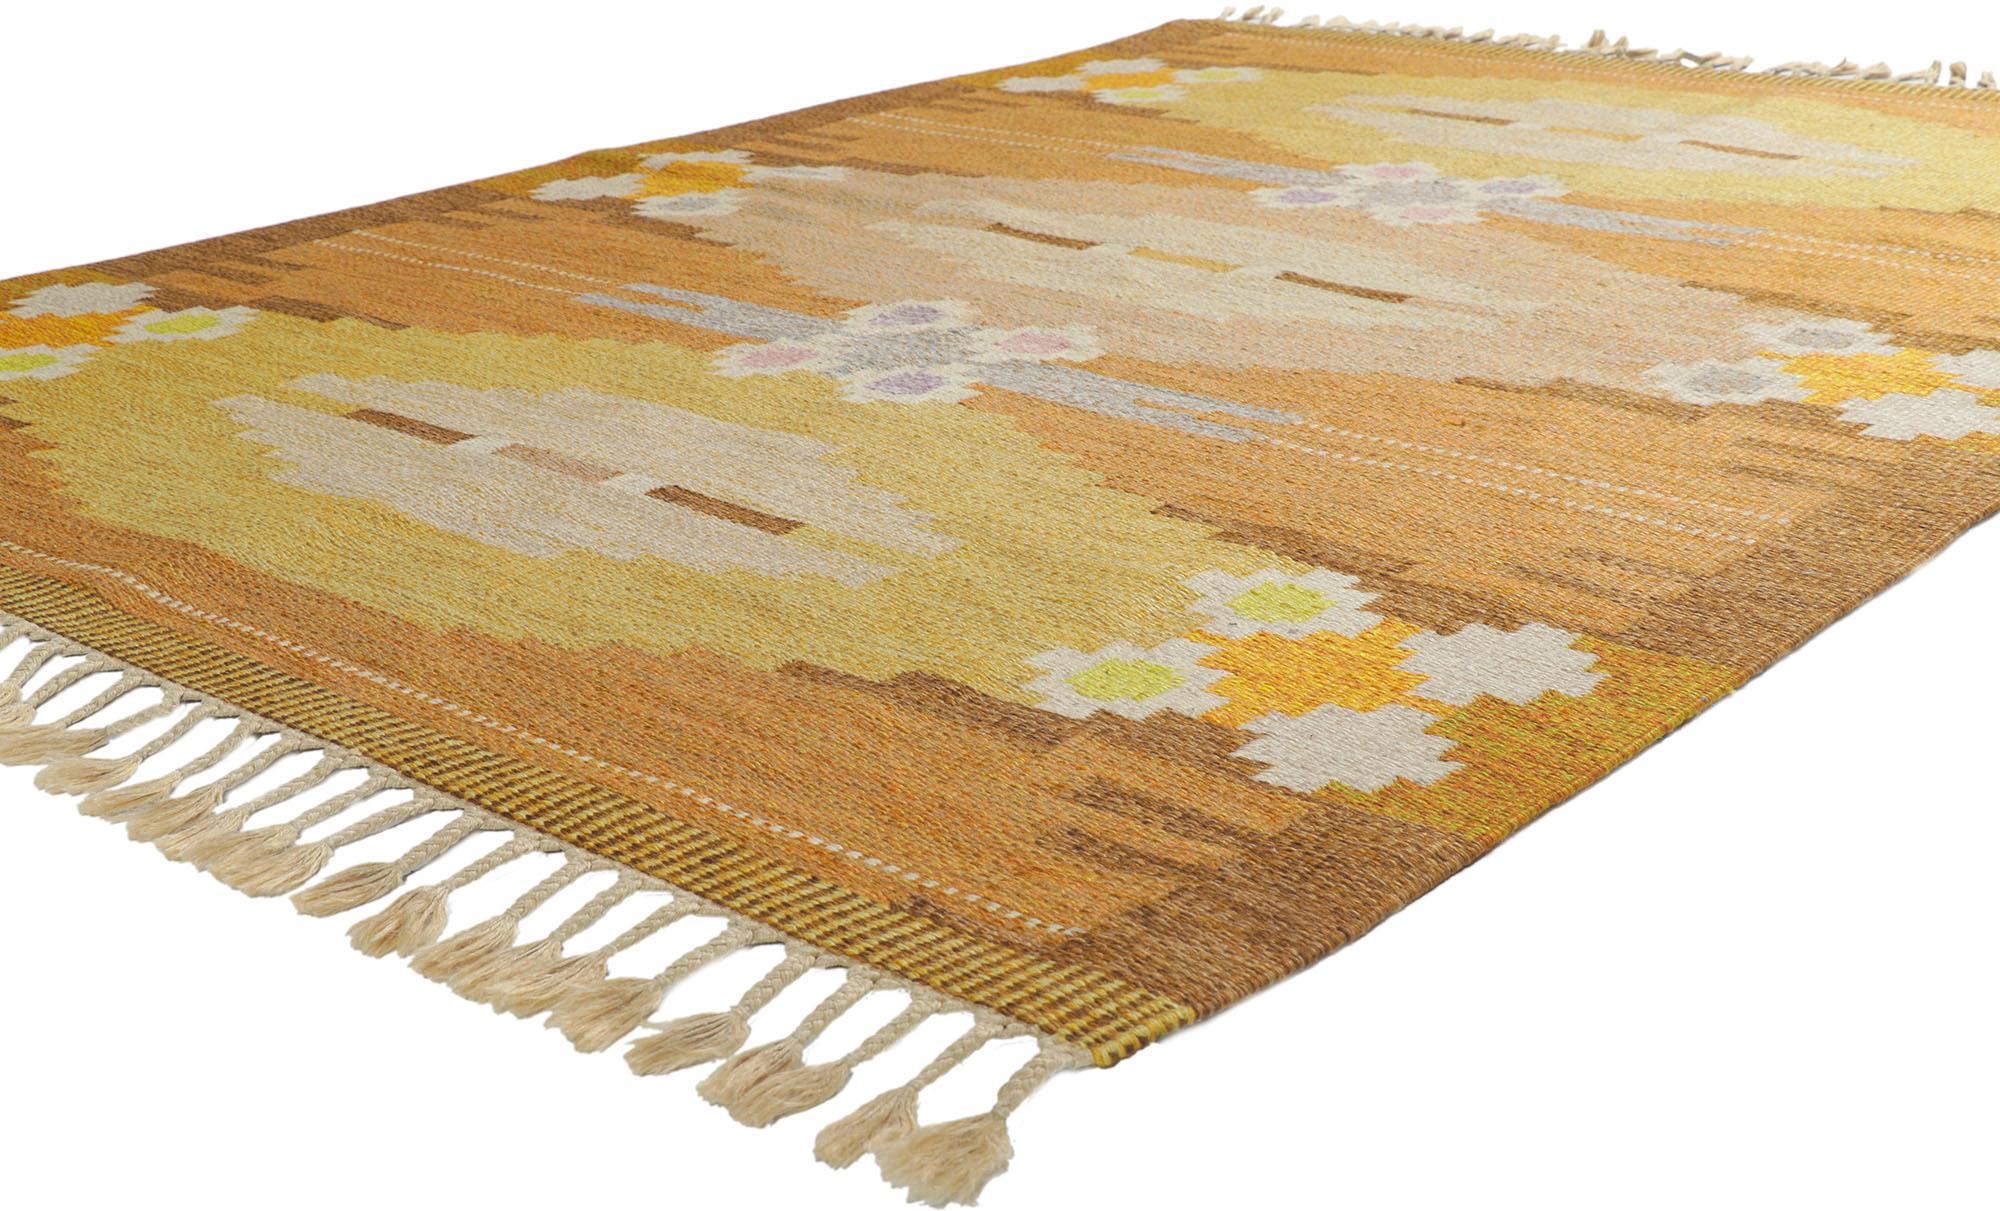 78247 Vintage Swedish Rollakan Rug by Ingegerd Silow, 05'06 x 07'09. With its Scandinavian Modern style, incredible detail and texture, this handwoven wool vintage Swedish rollakan rug is a captivating vision of woven beauty. The geometric design